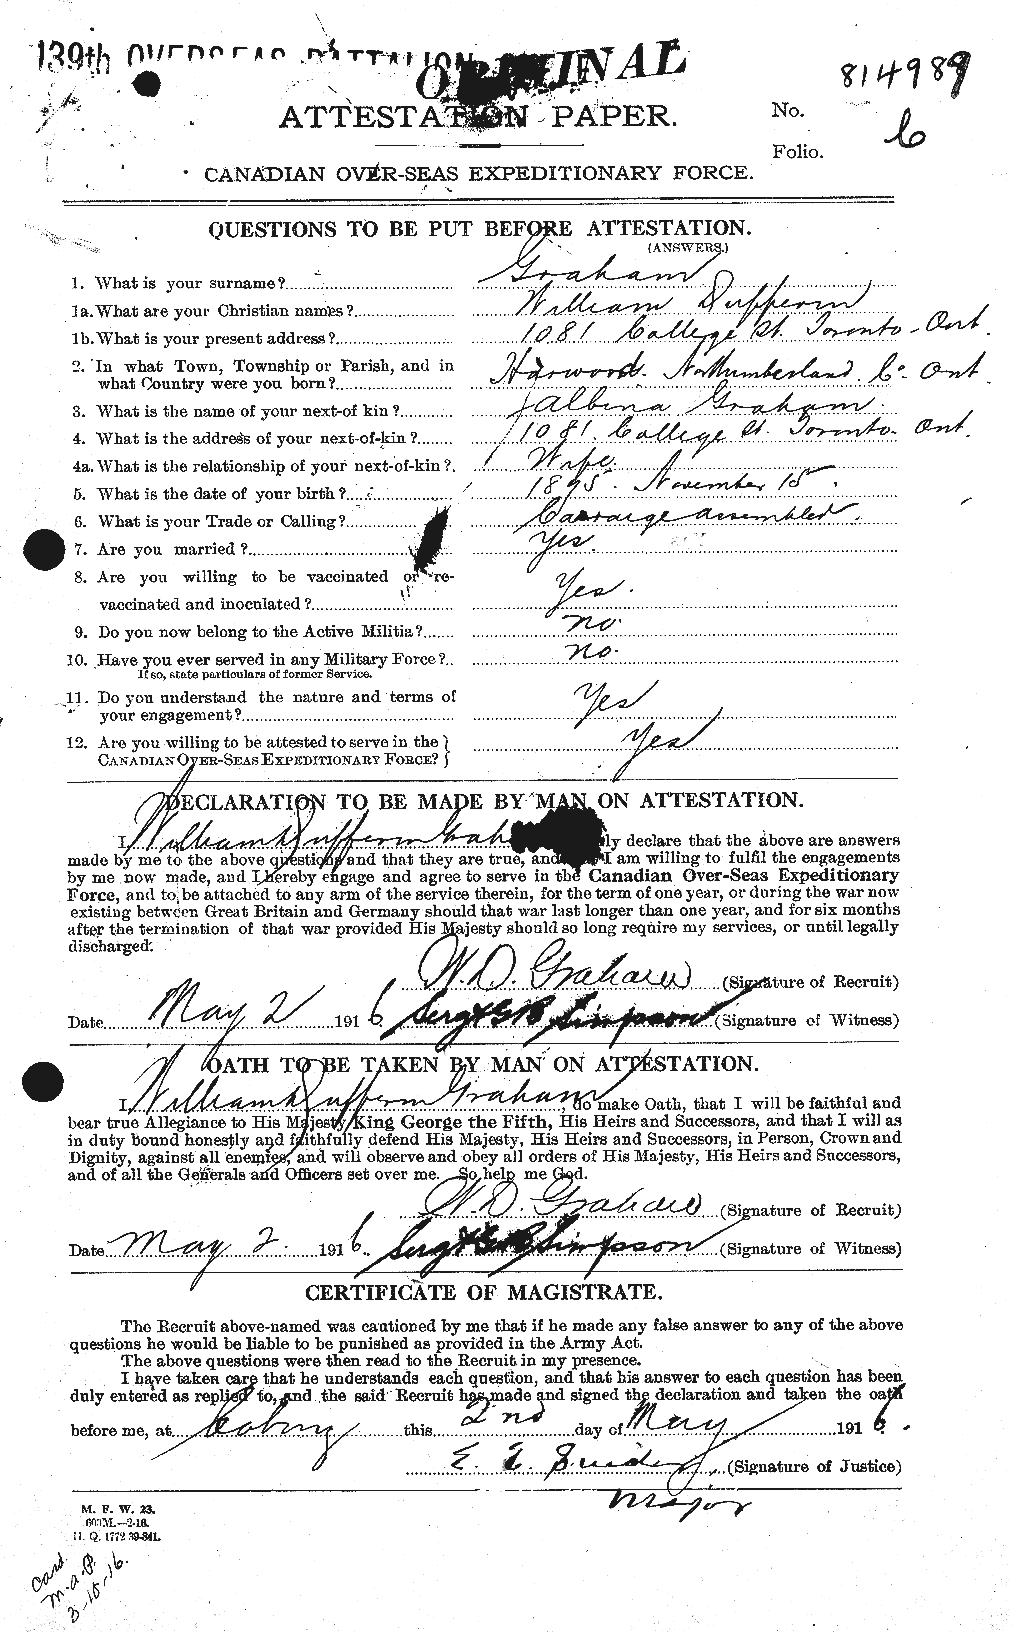 Personnel Records of the First World War - CEF 357982a